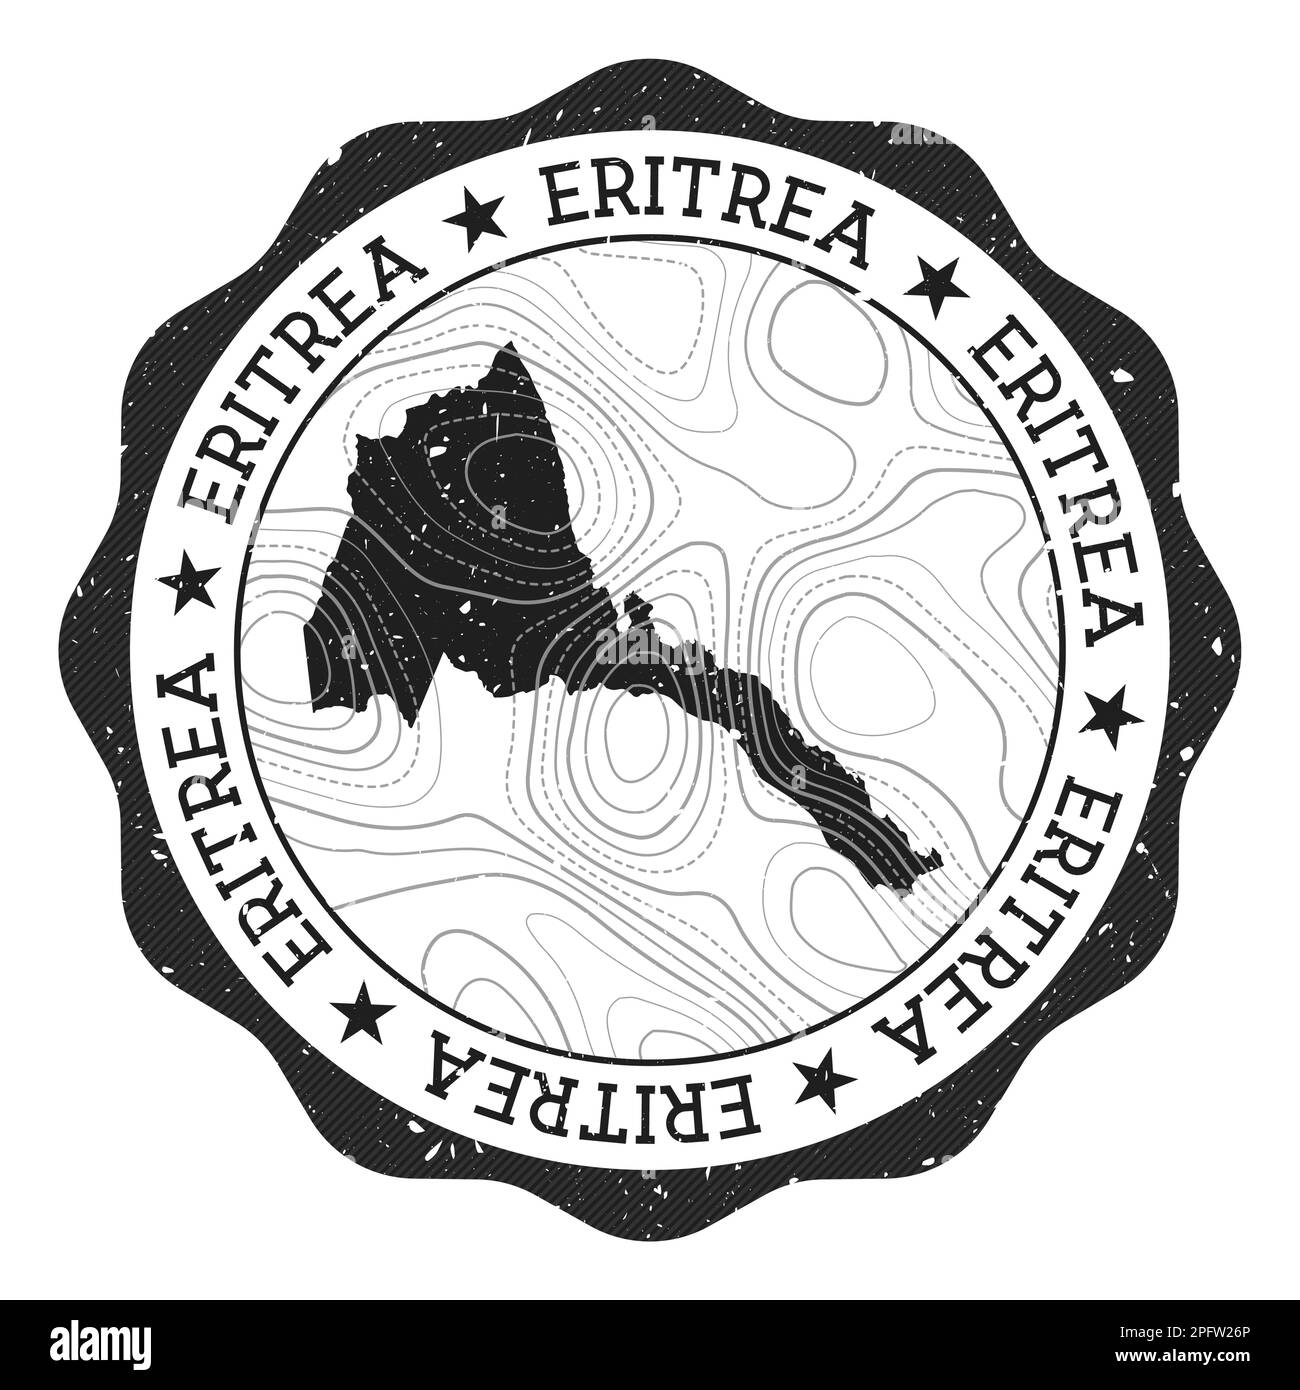 Eritrea outdoor stamp. Round sticker with map of country with topographic isolines. Vector illustration. Can be used as insignia, logotype, label, sti Stock Vector